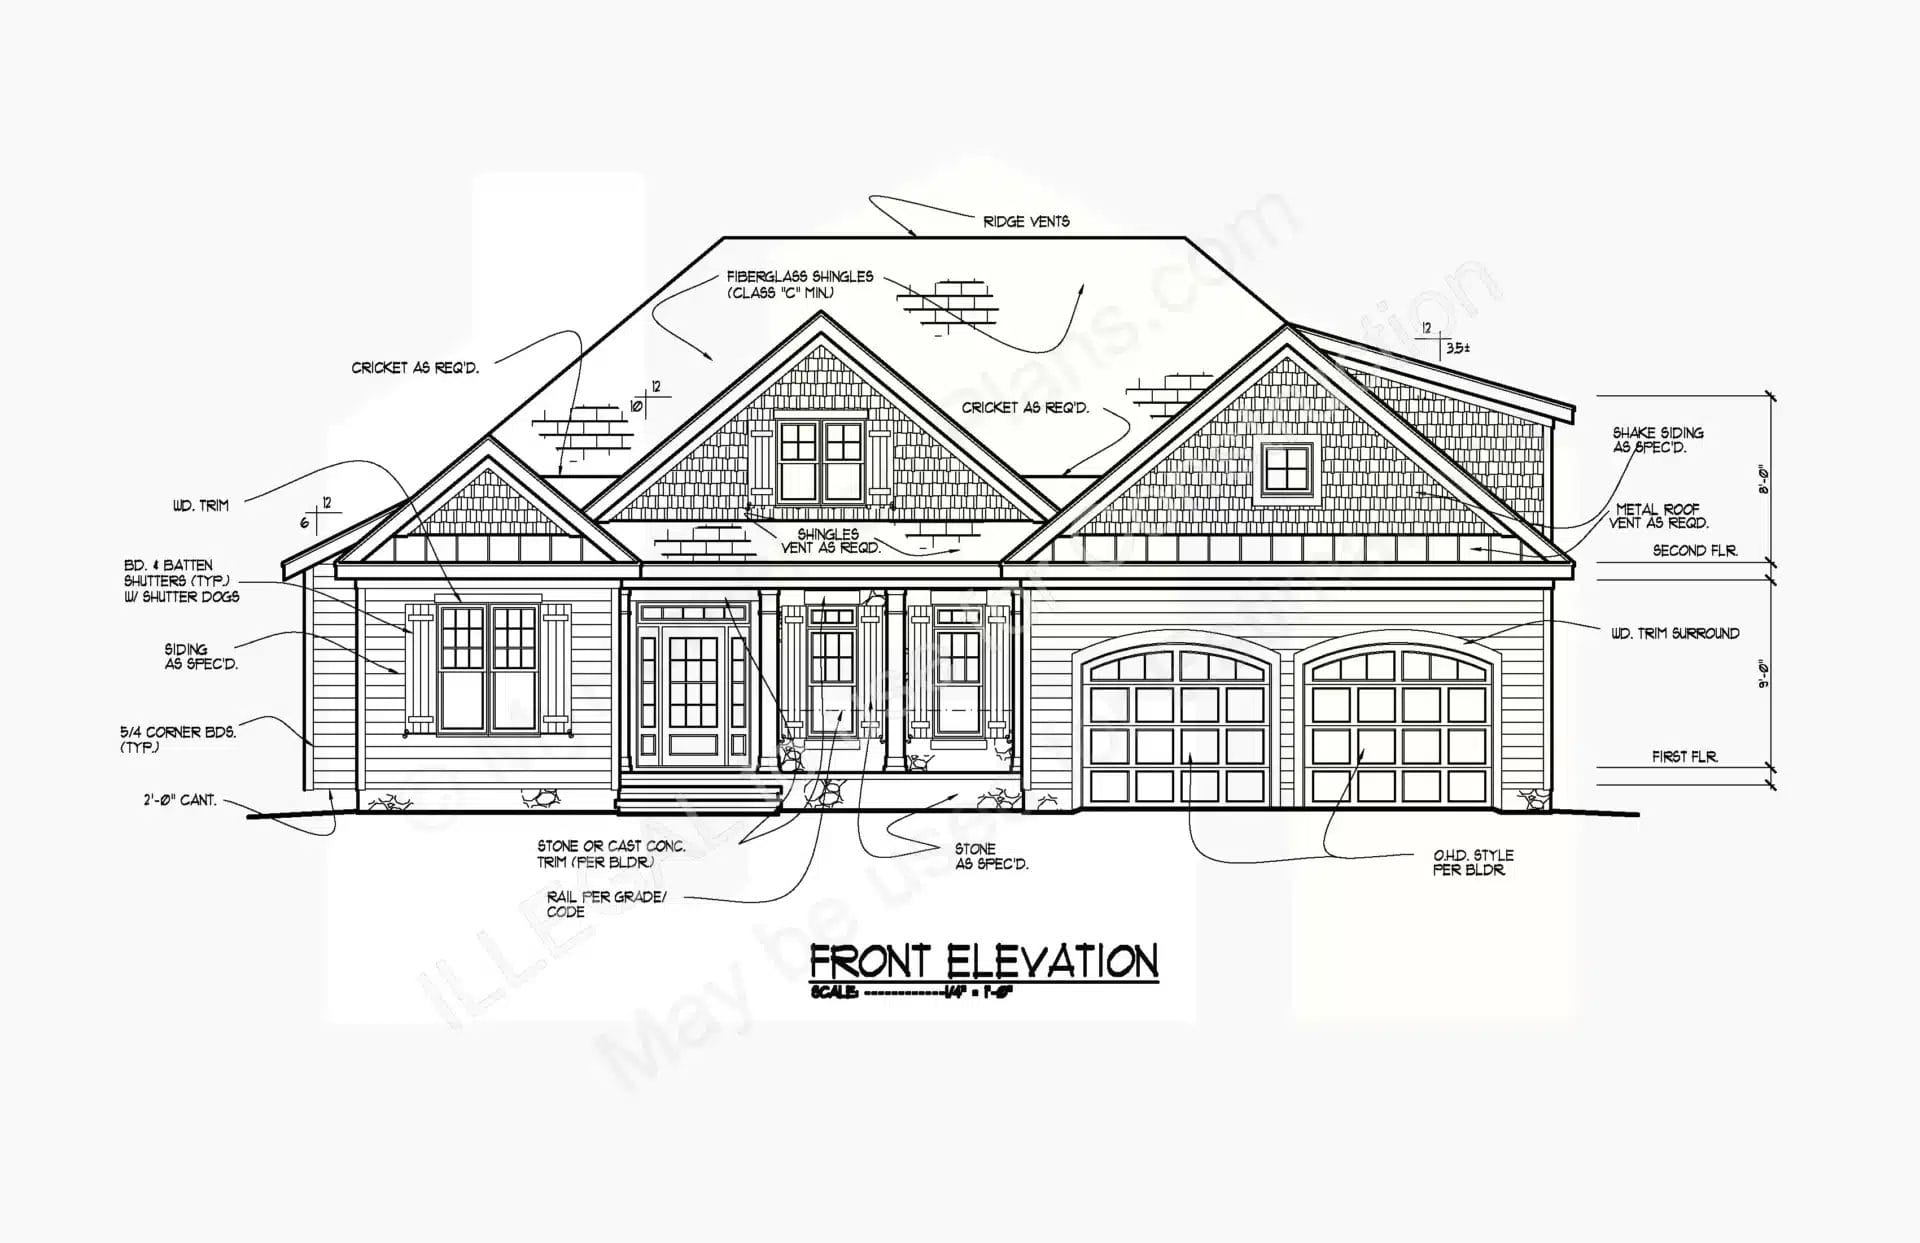 Architectural drawing of a single-story home's front elevation, featuring labeled dimensions, a double garage, gabled roofs, and a porch with columns. The design includes brick and siding textures.